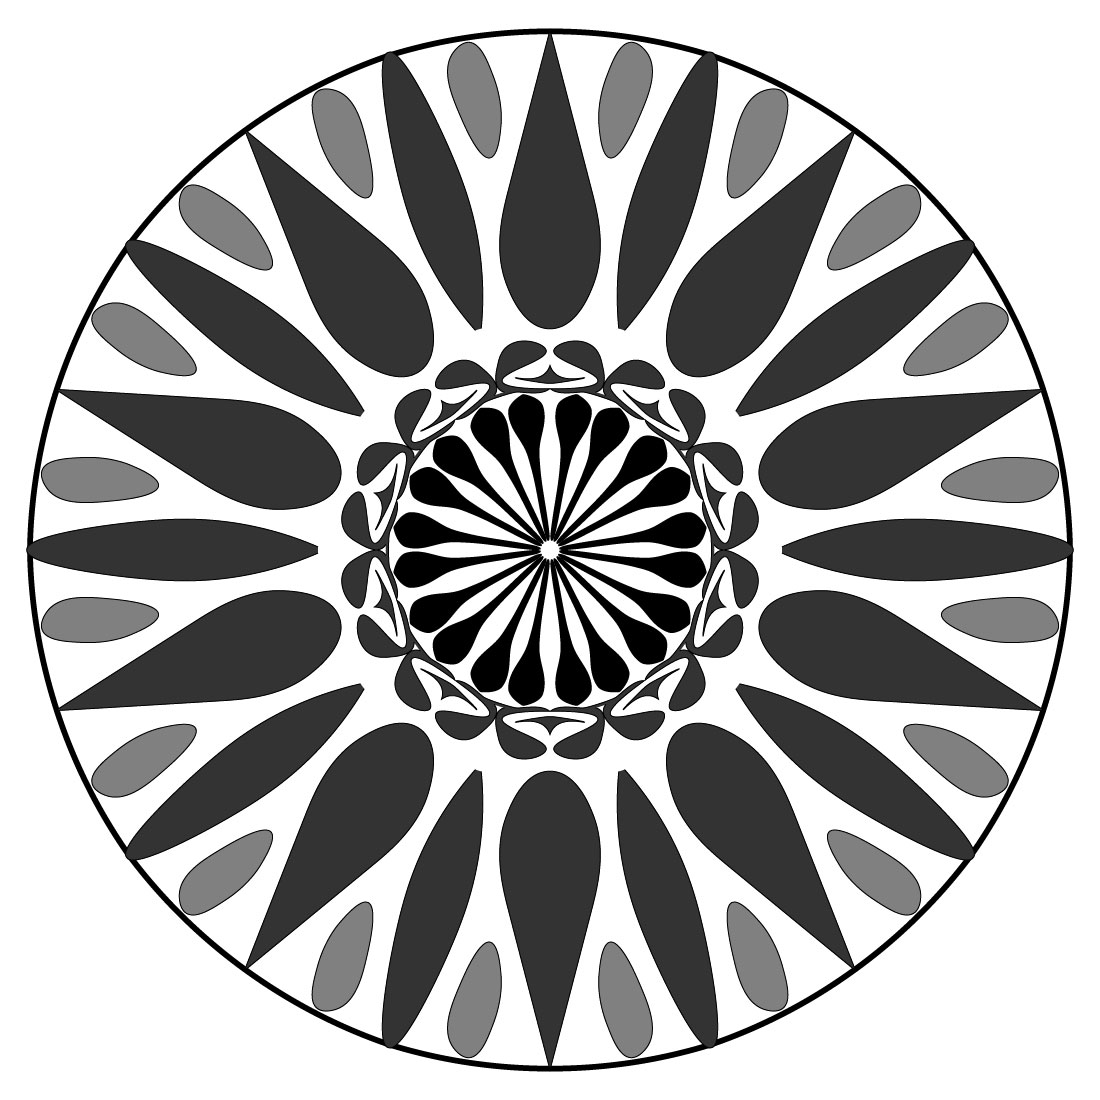 Mandala-Art-with-long-petales-in-black-and-white cover image.